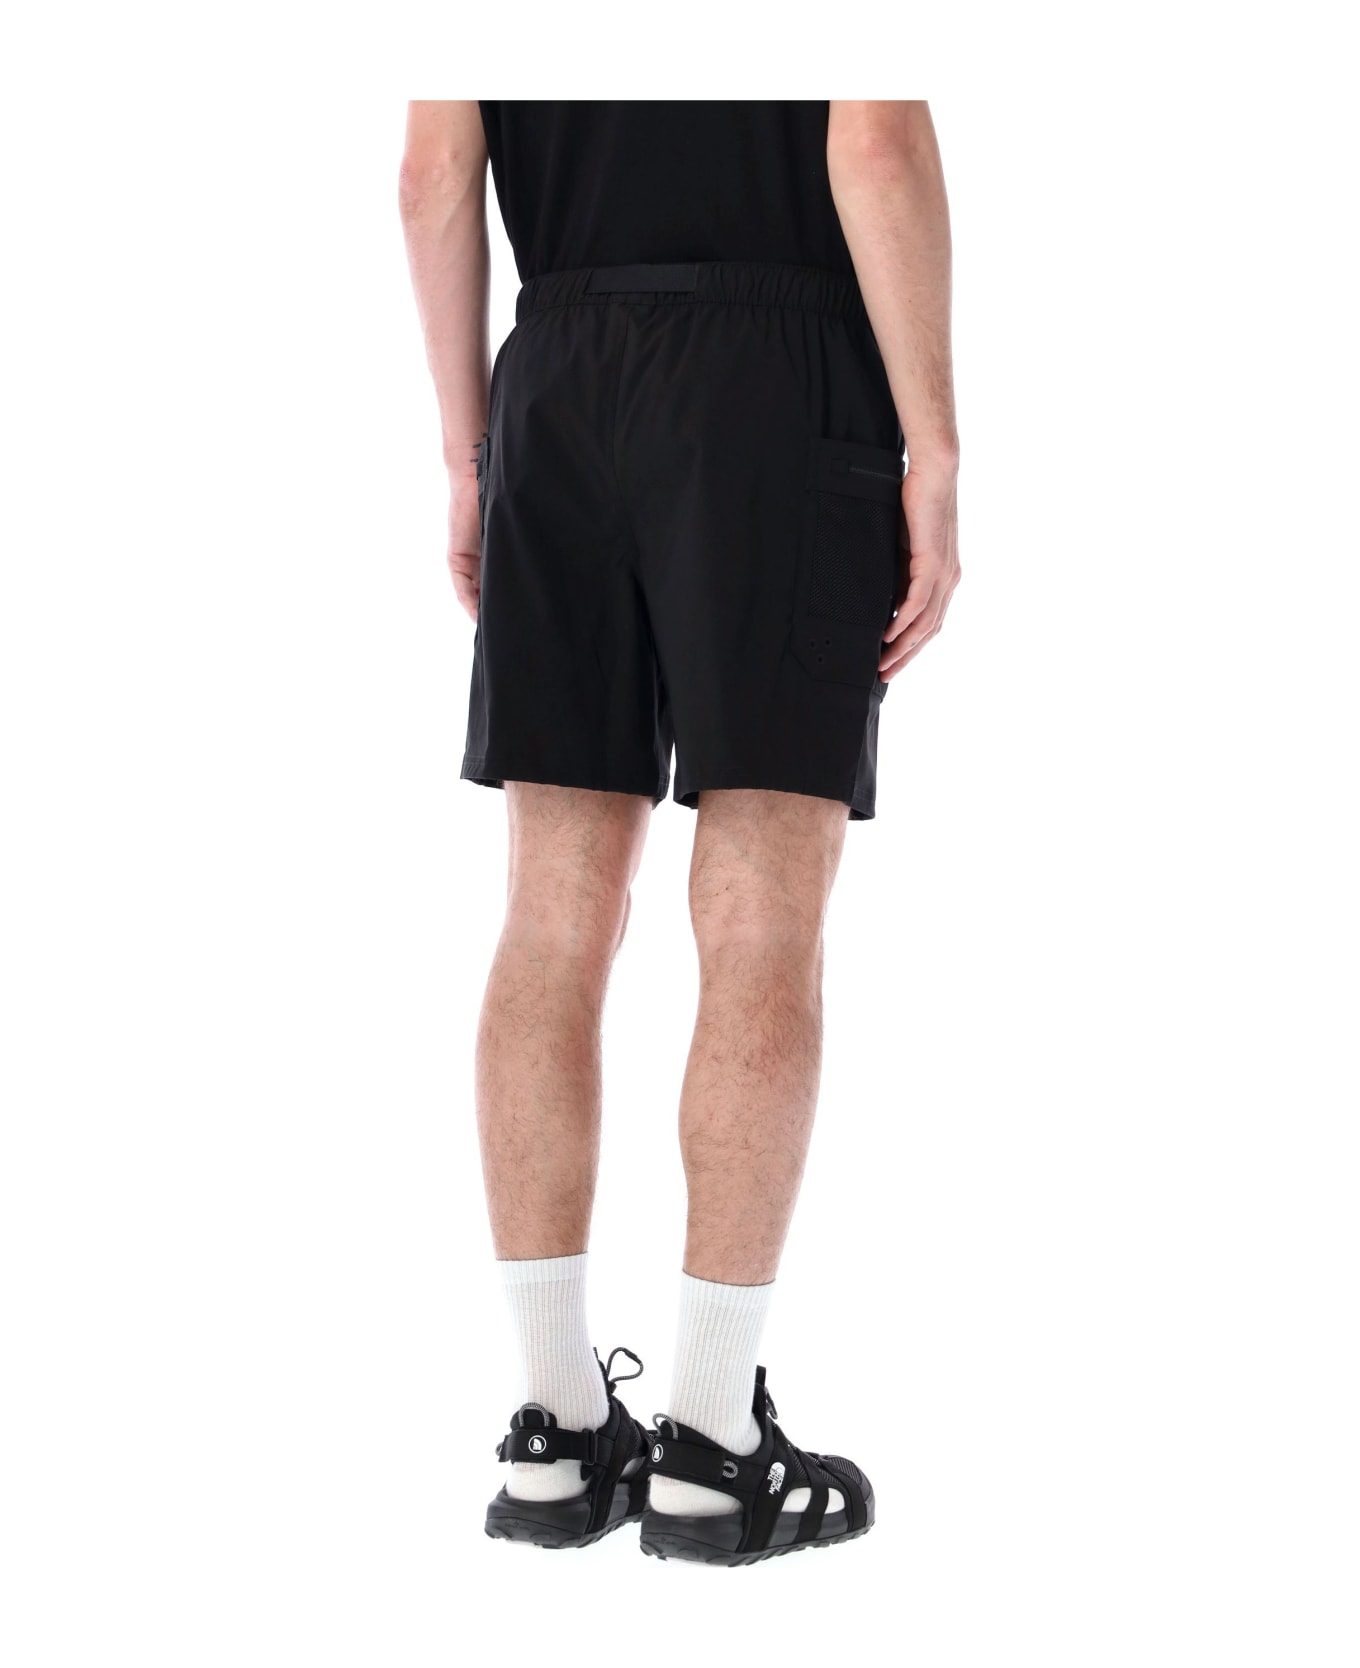 The North Face Ripstop Belted Cargo Short - BLACK